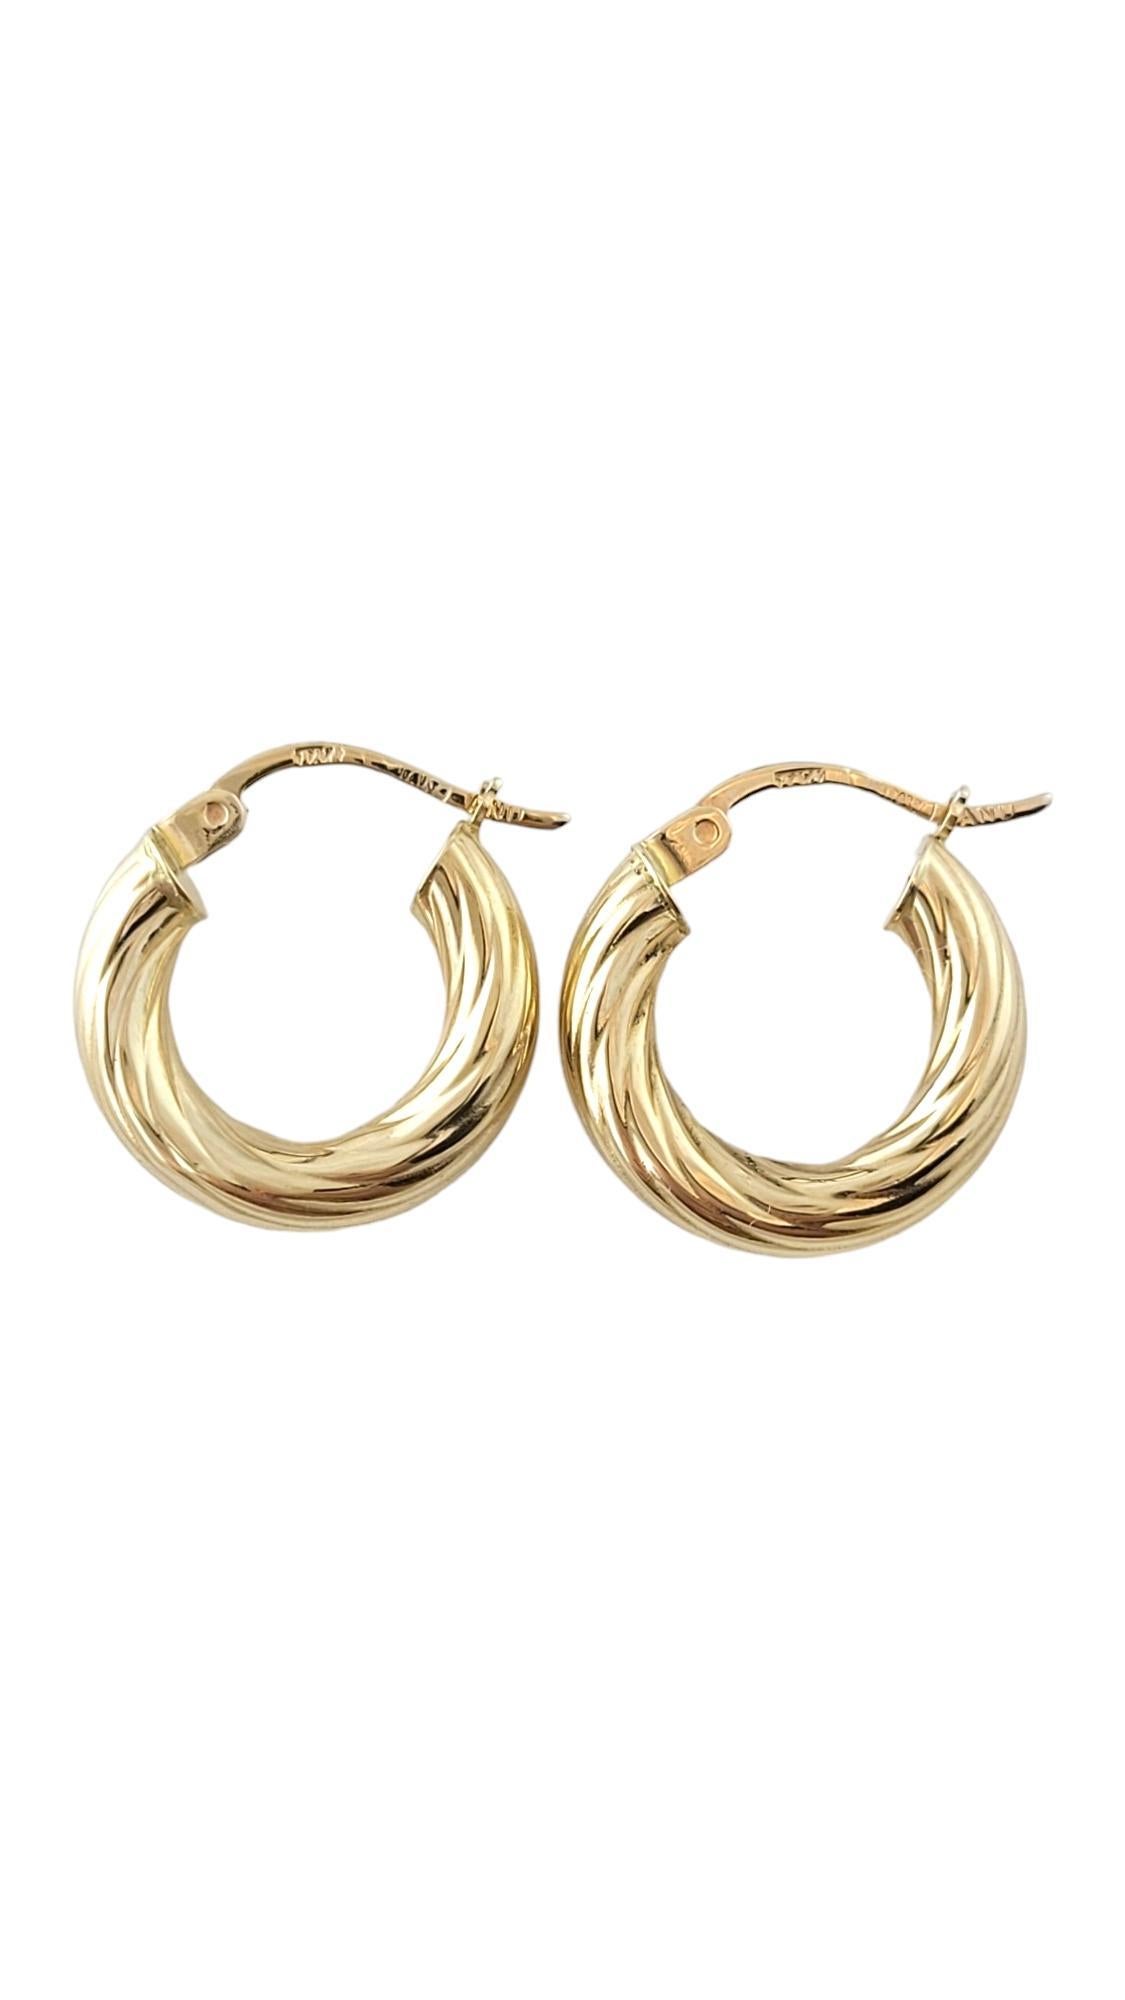 14K Yellow Gold Twisted Hoop Earrings #16868 In Good Condition For Sale In Washington Depot, CT